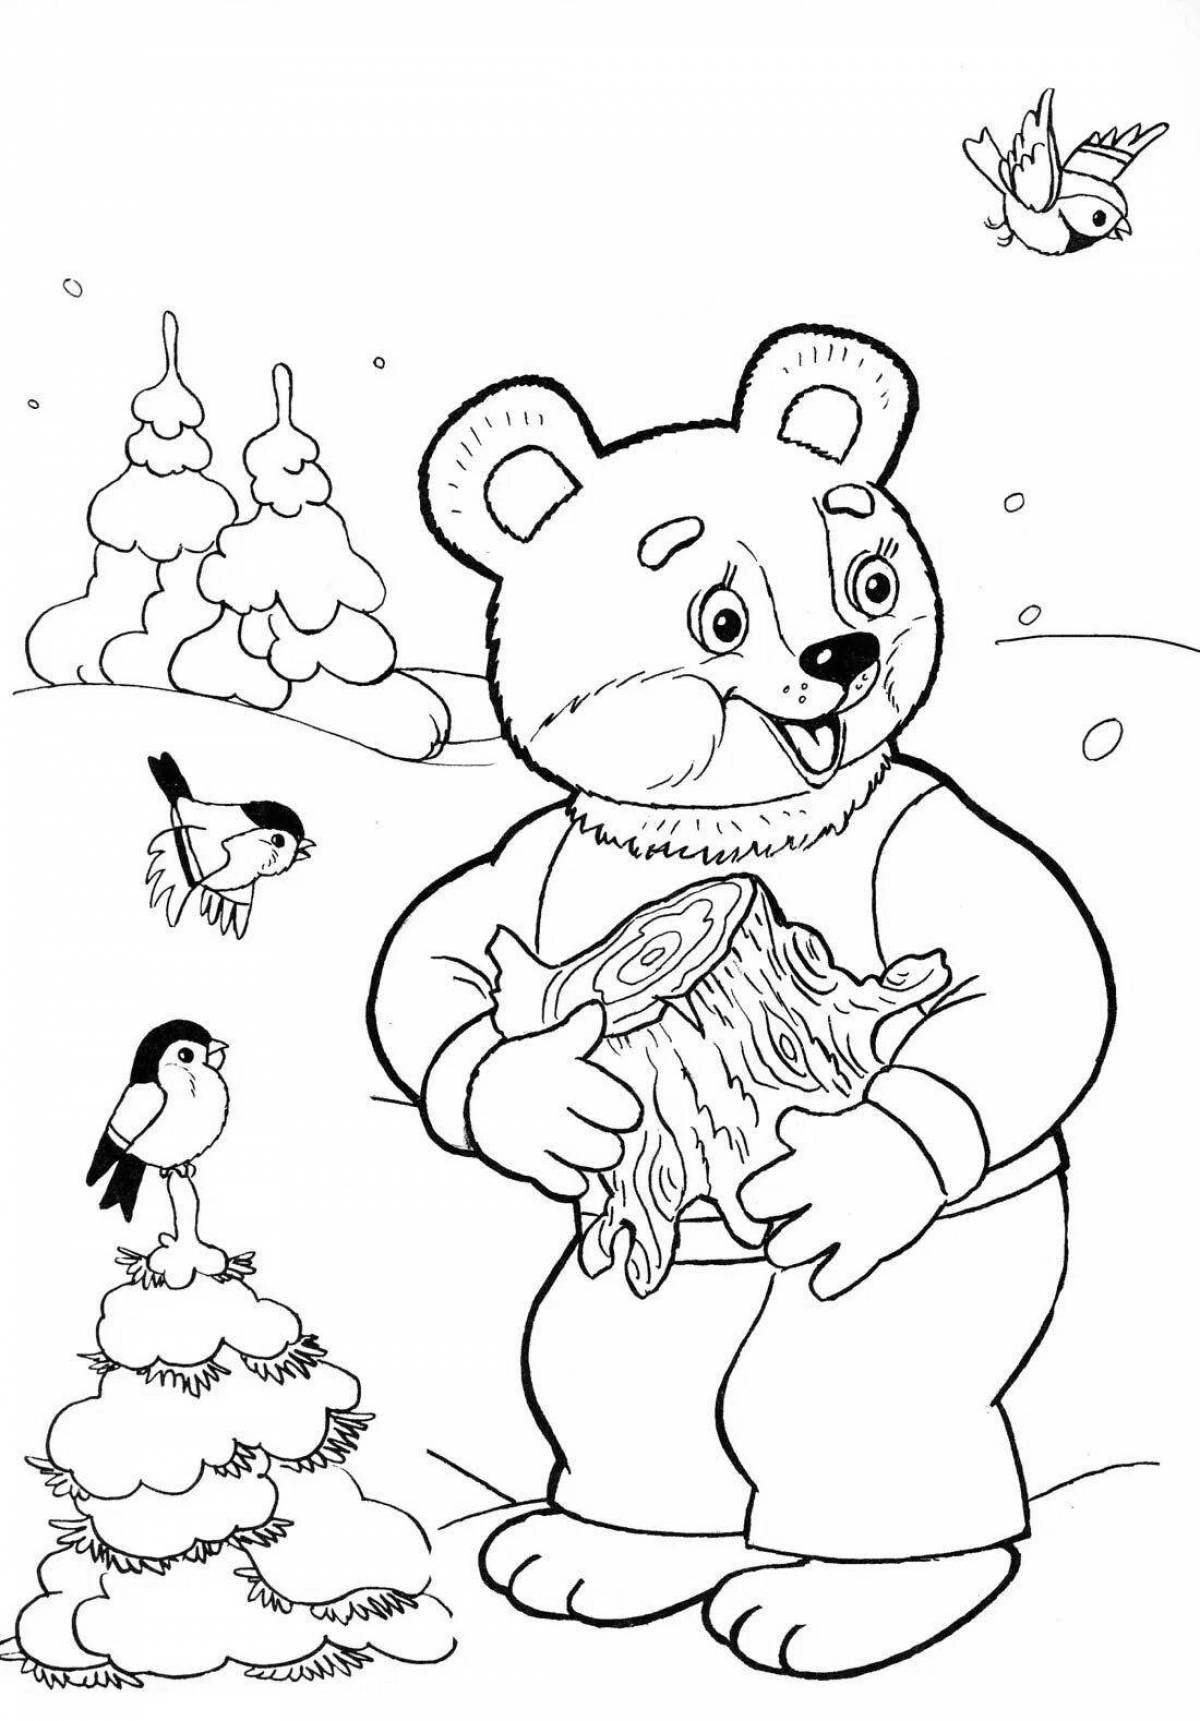 Fancy coloring clumsy bear